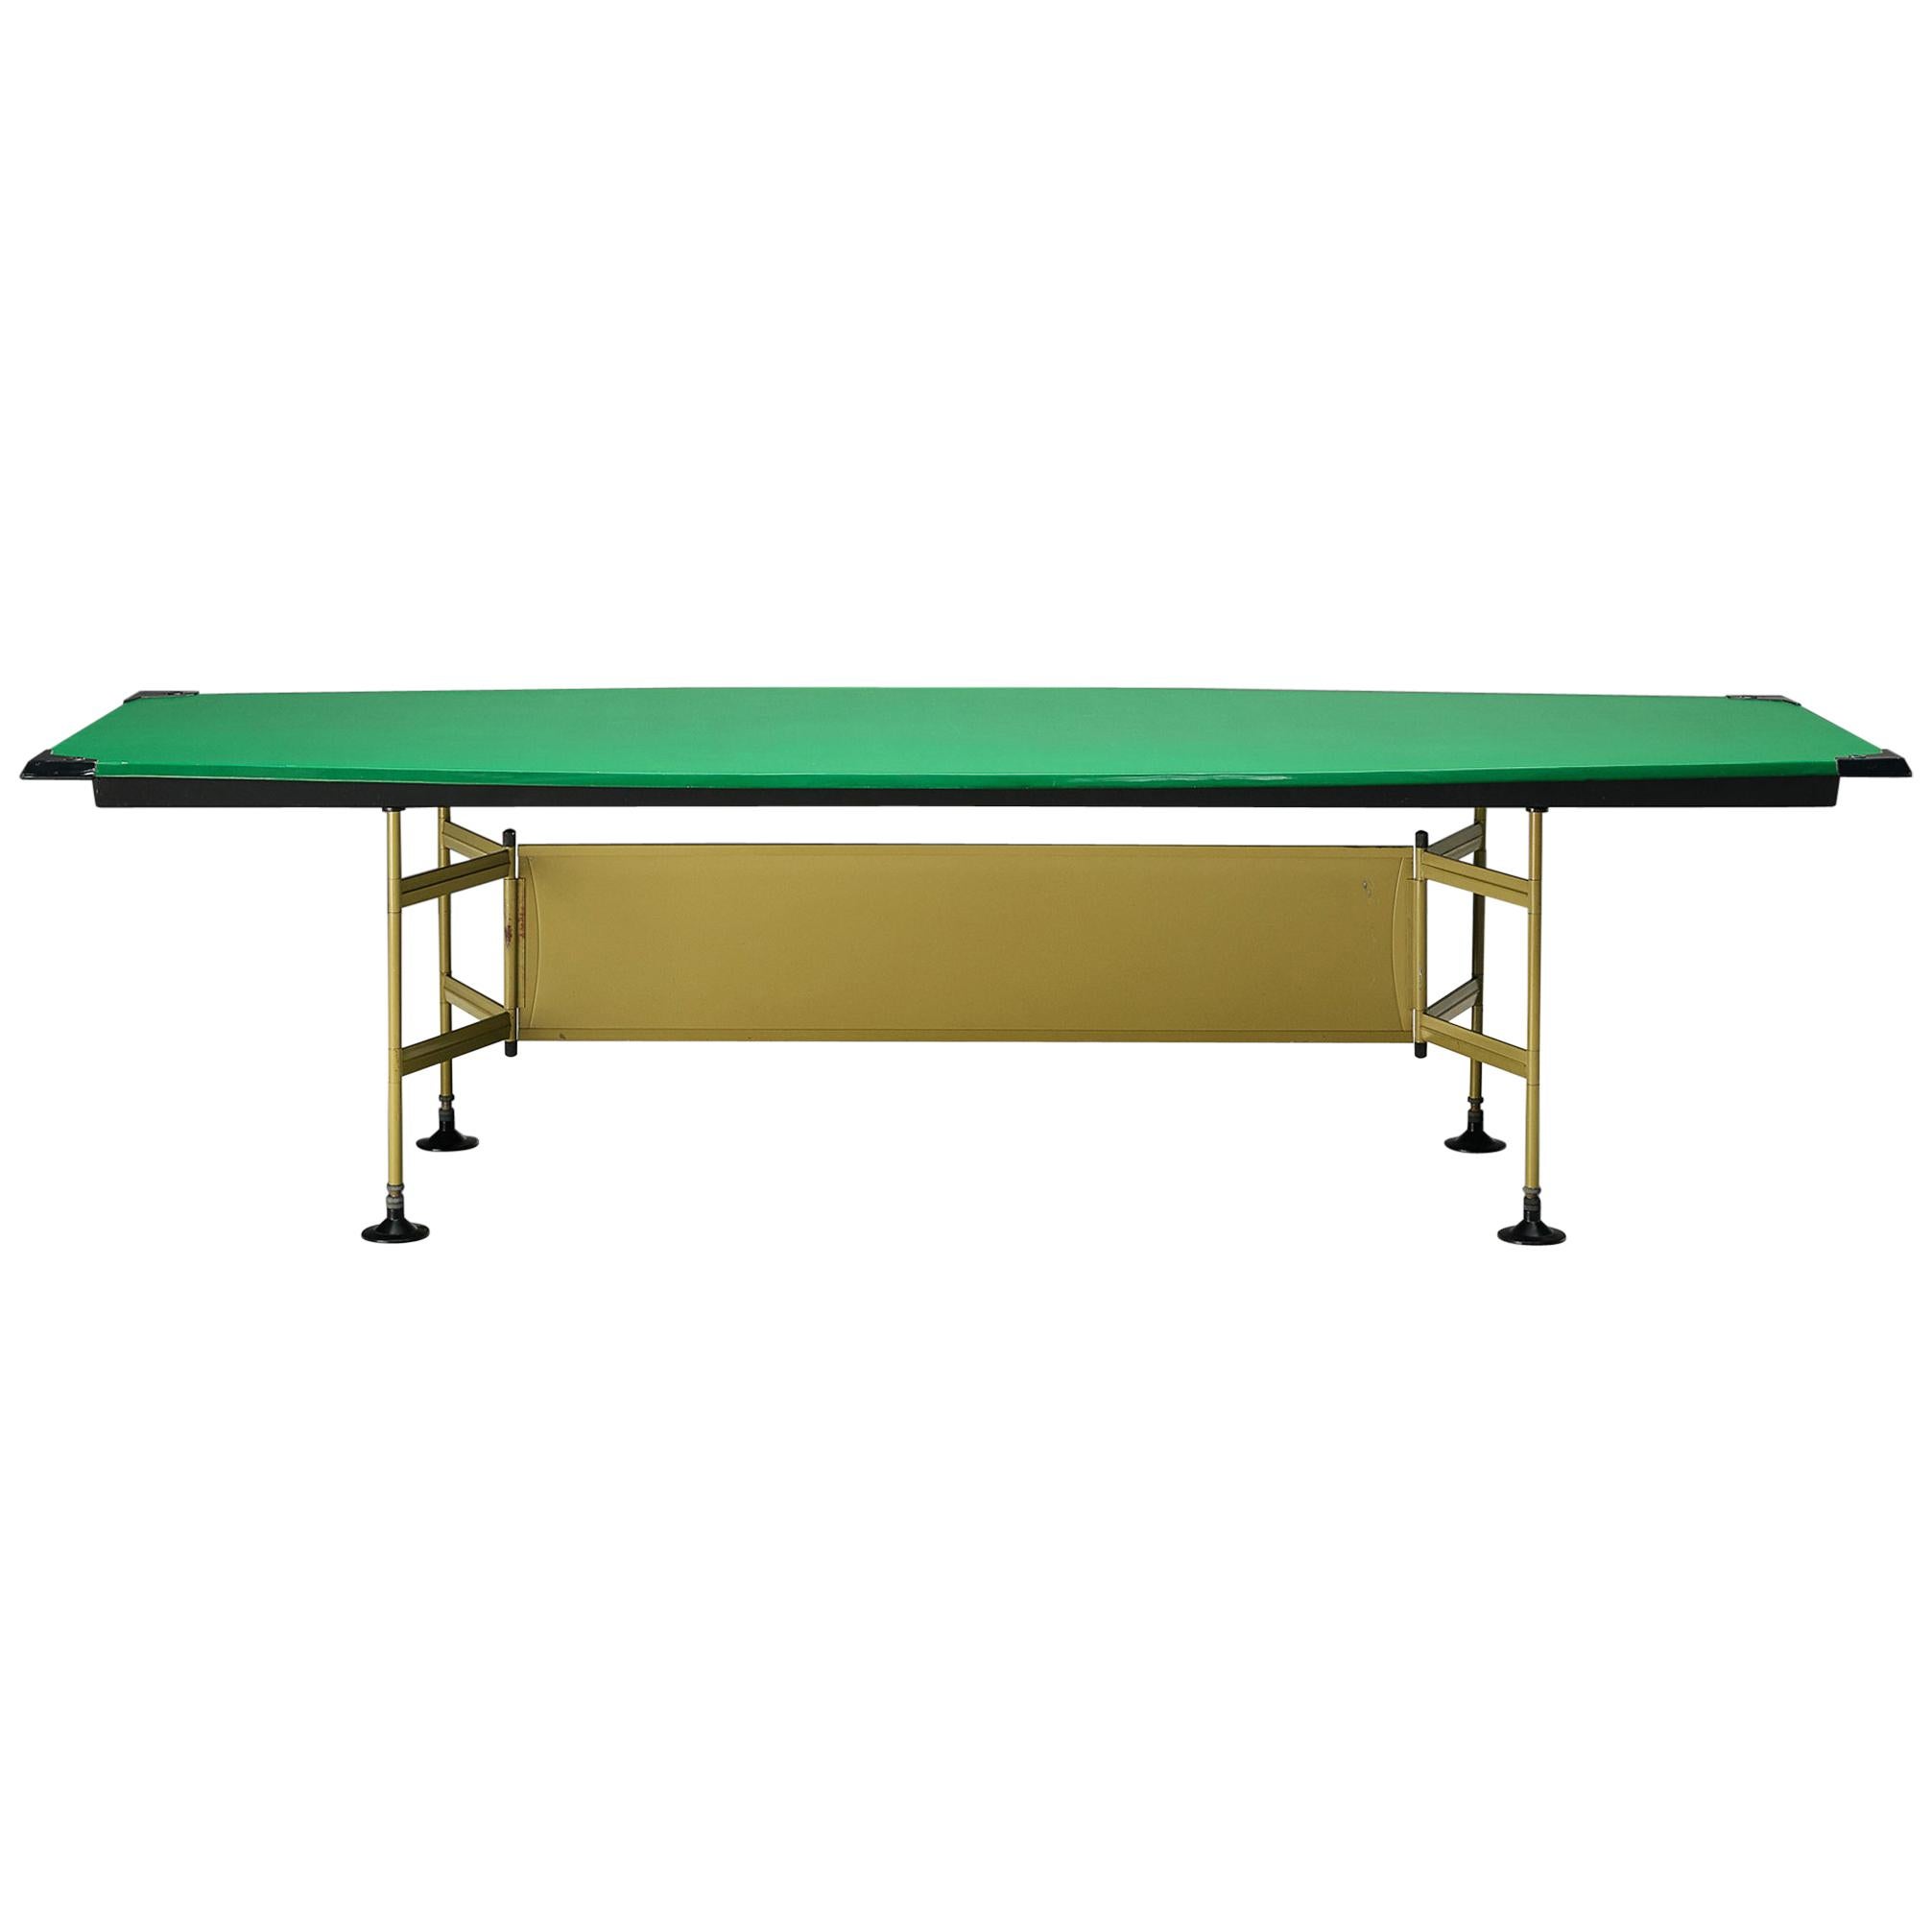 BBPR Large Boat-Shaped Table for Olivetti